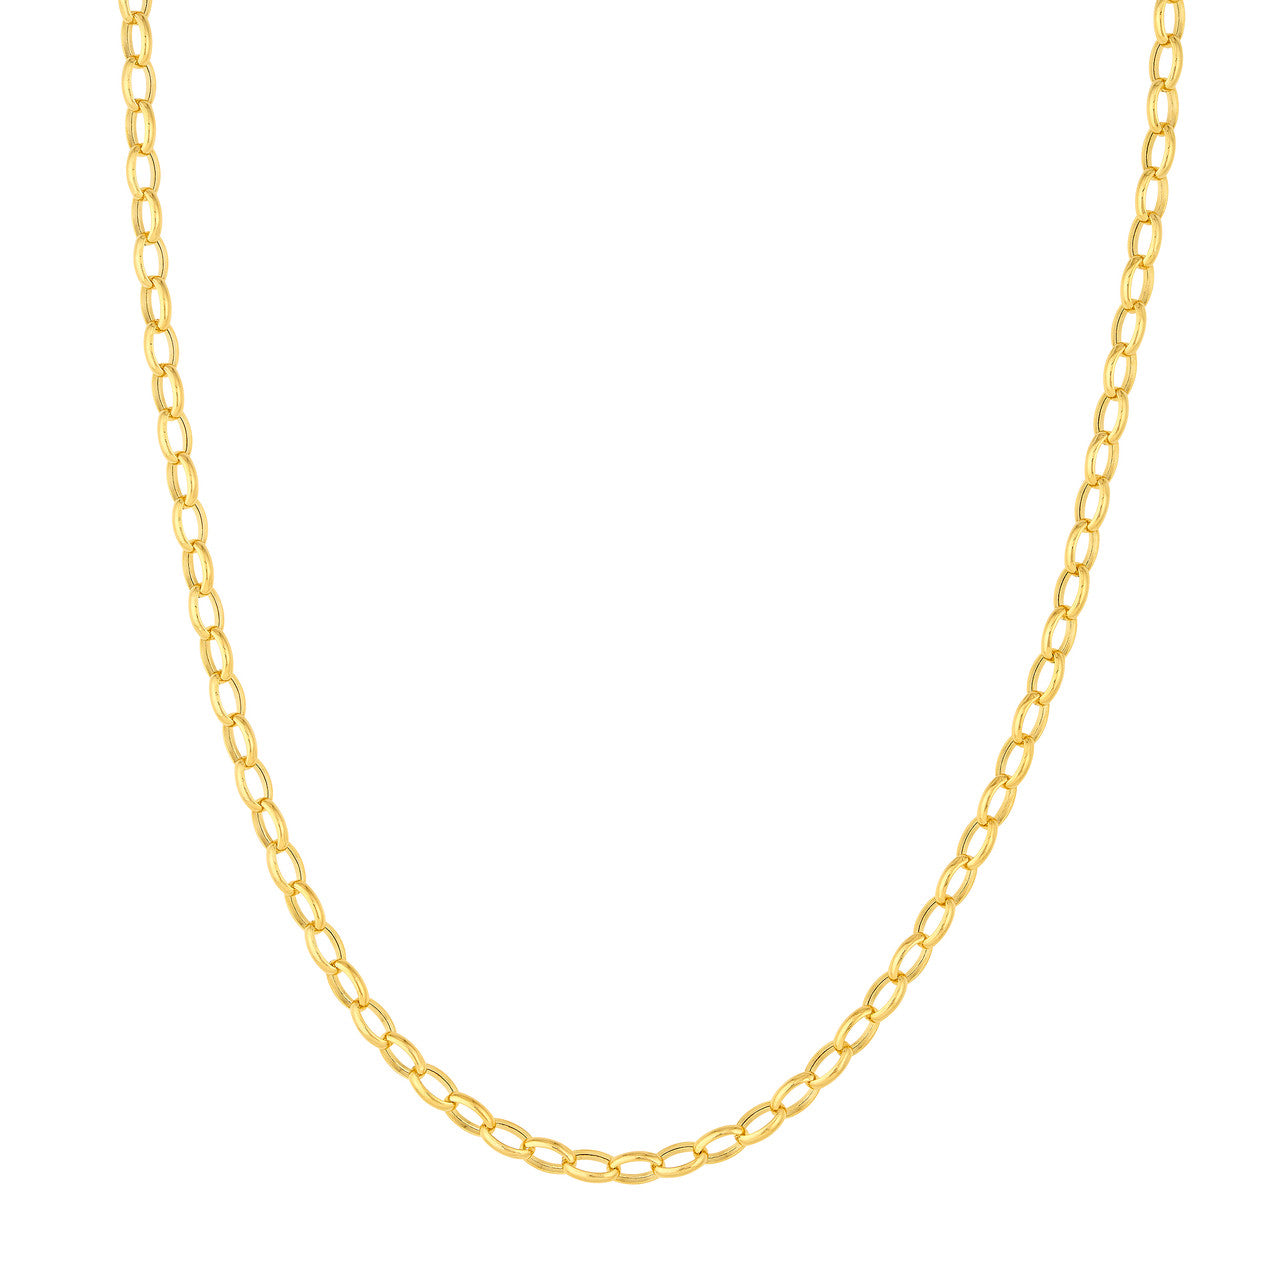 4.5mm Hollow Oval Forzentina Chain